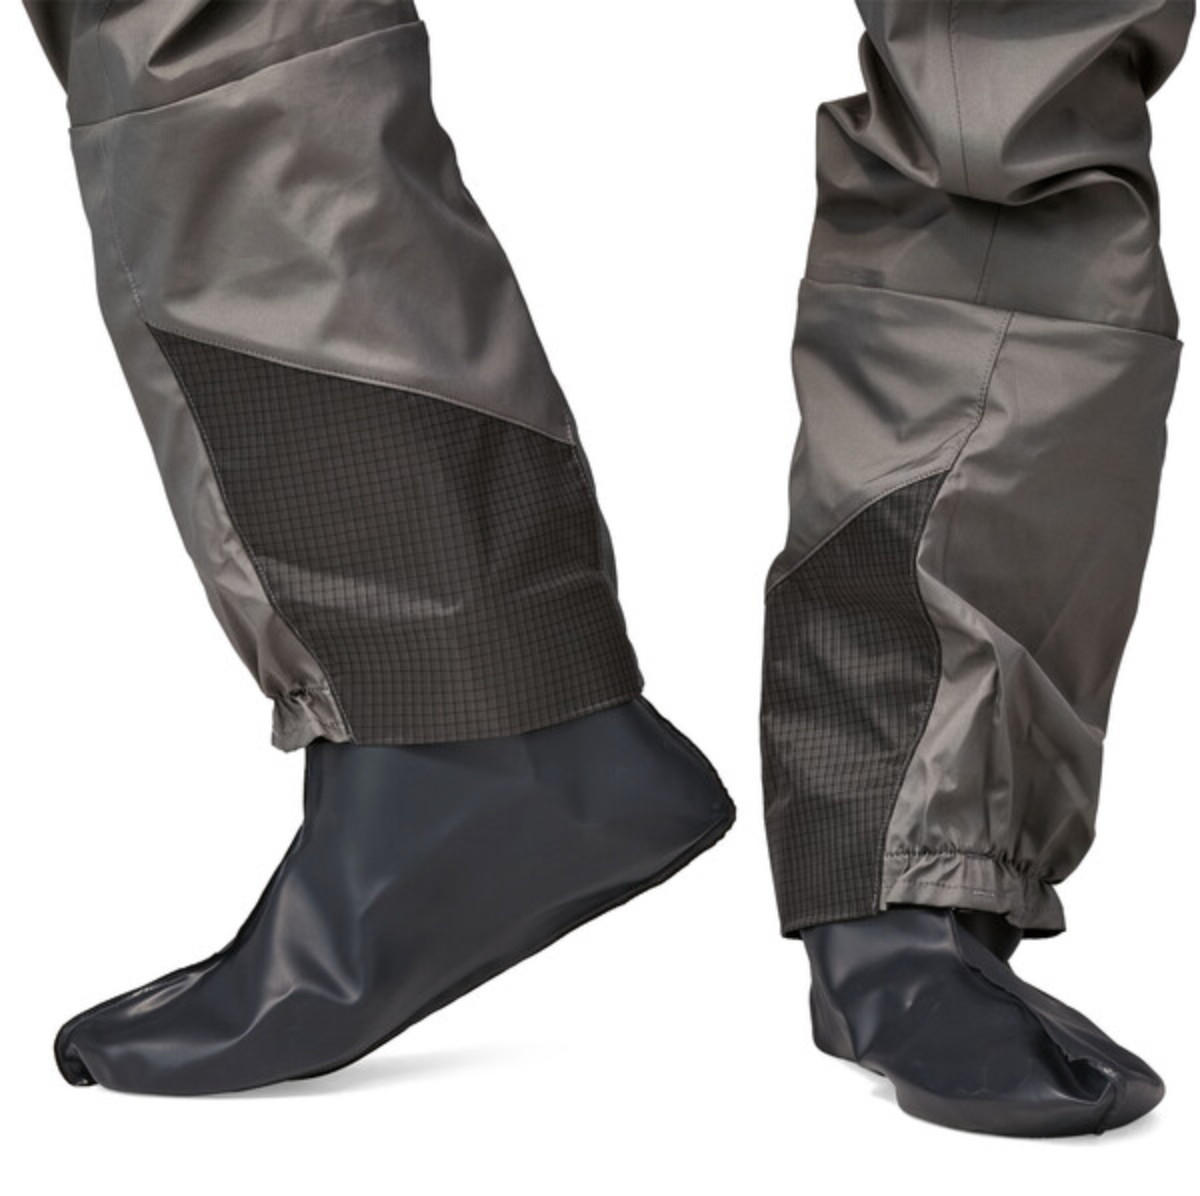 Patagonia Swiftcurrent Ultralight Waders